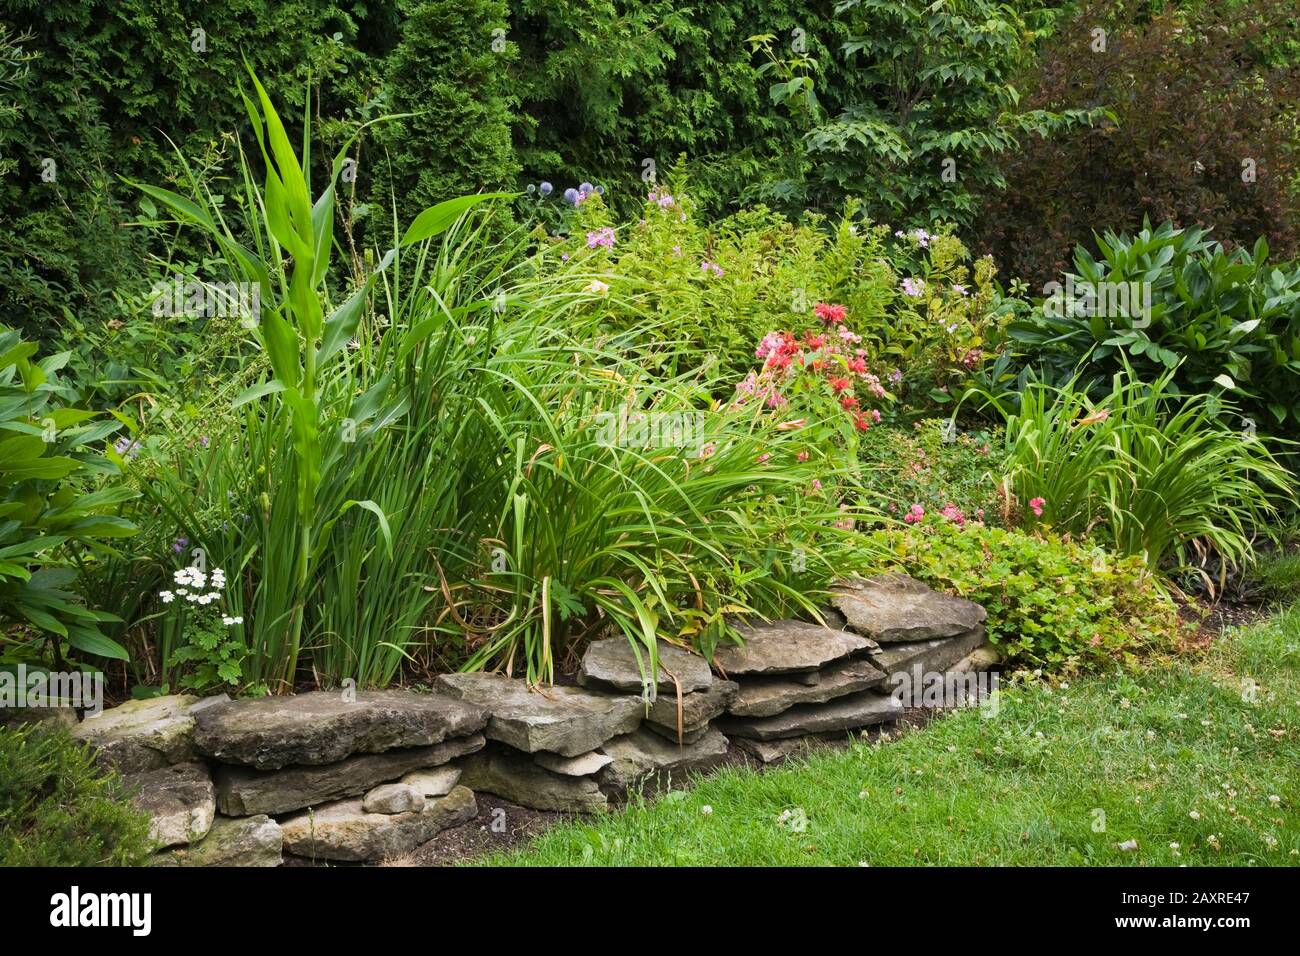 Raised stone edged border with red Monarda, mauve Phlox flowers and Thuja occidentalis - Cedar tree hedge in the background in backyard garden. Stock Photo